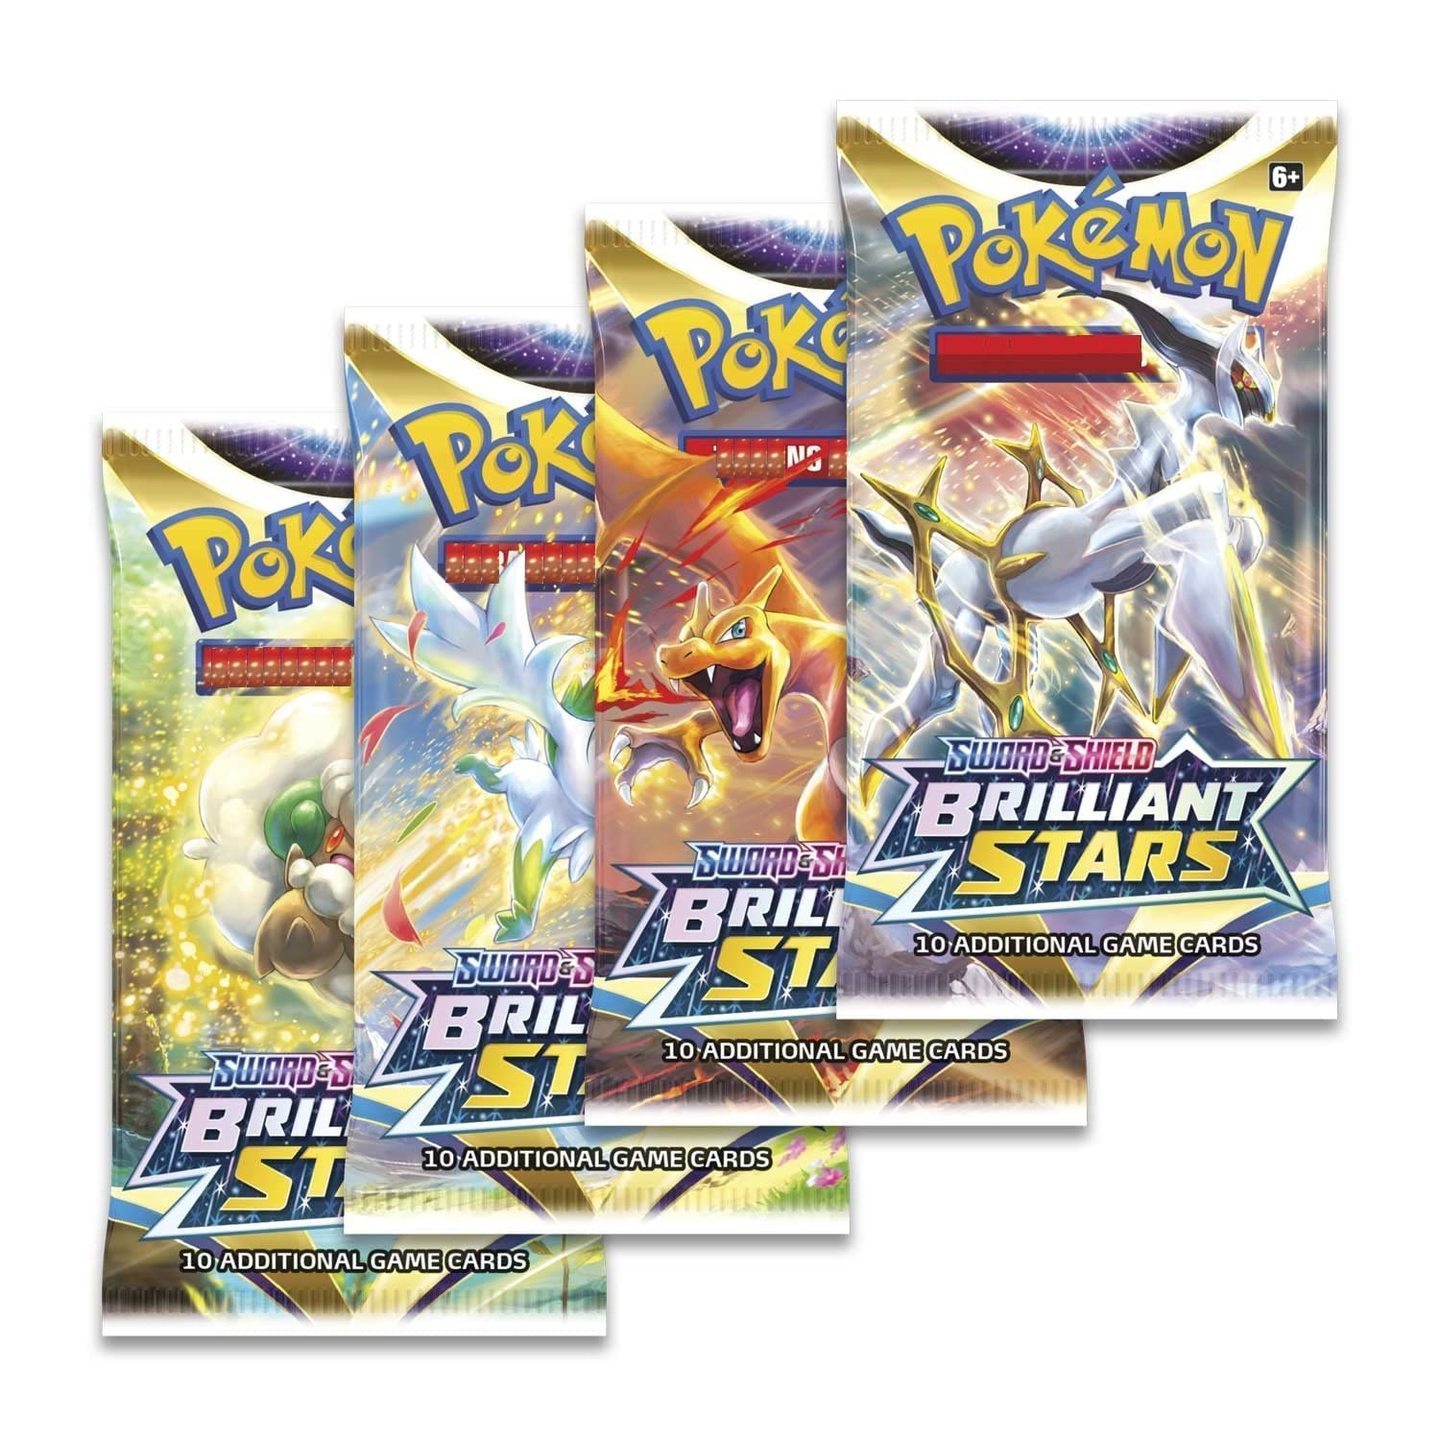 Brilliant Star Booster Pokemon cards (1 pack)